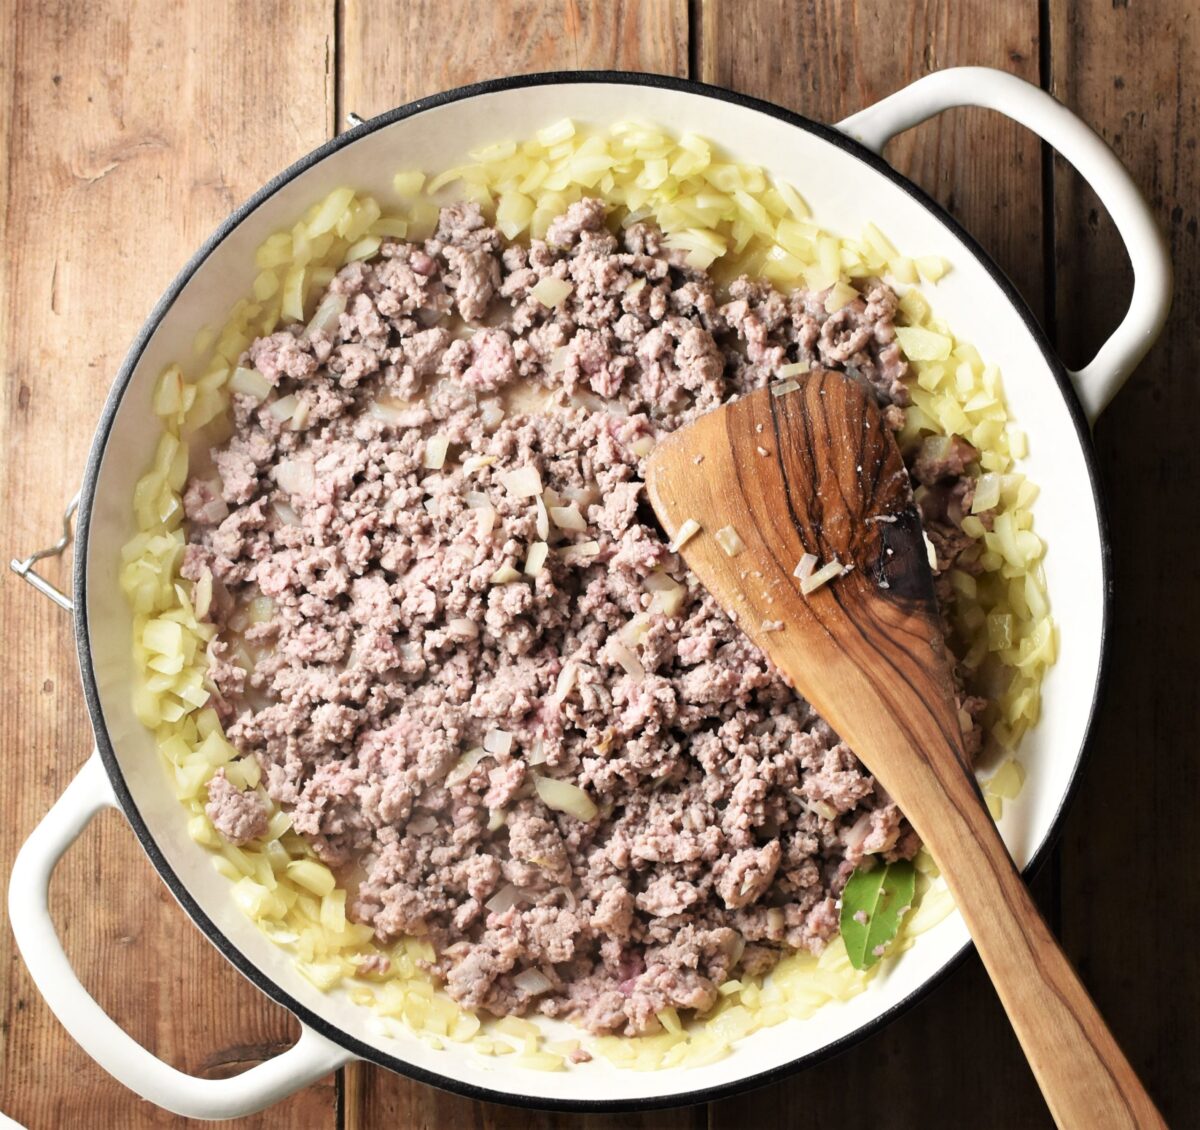 Onion and ground meat mixture in large white shallow pan with wooden spoon.